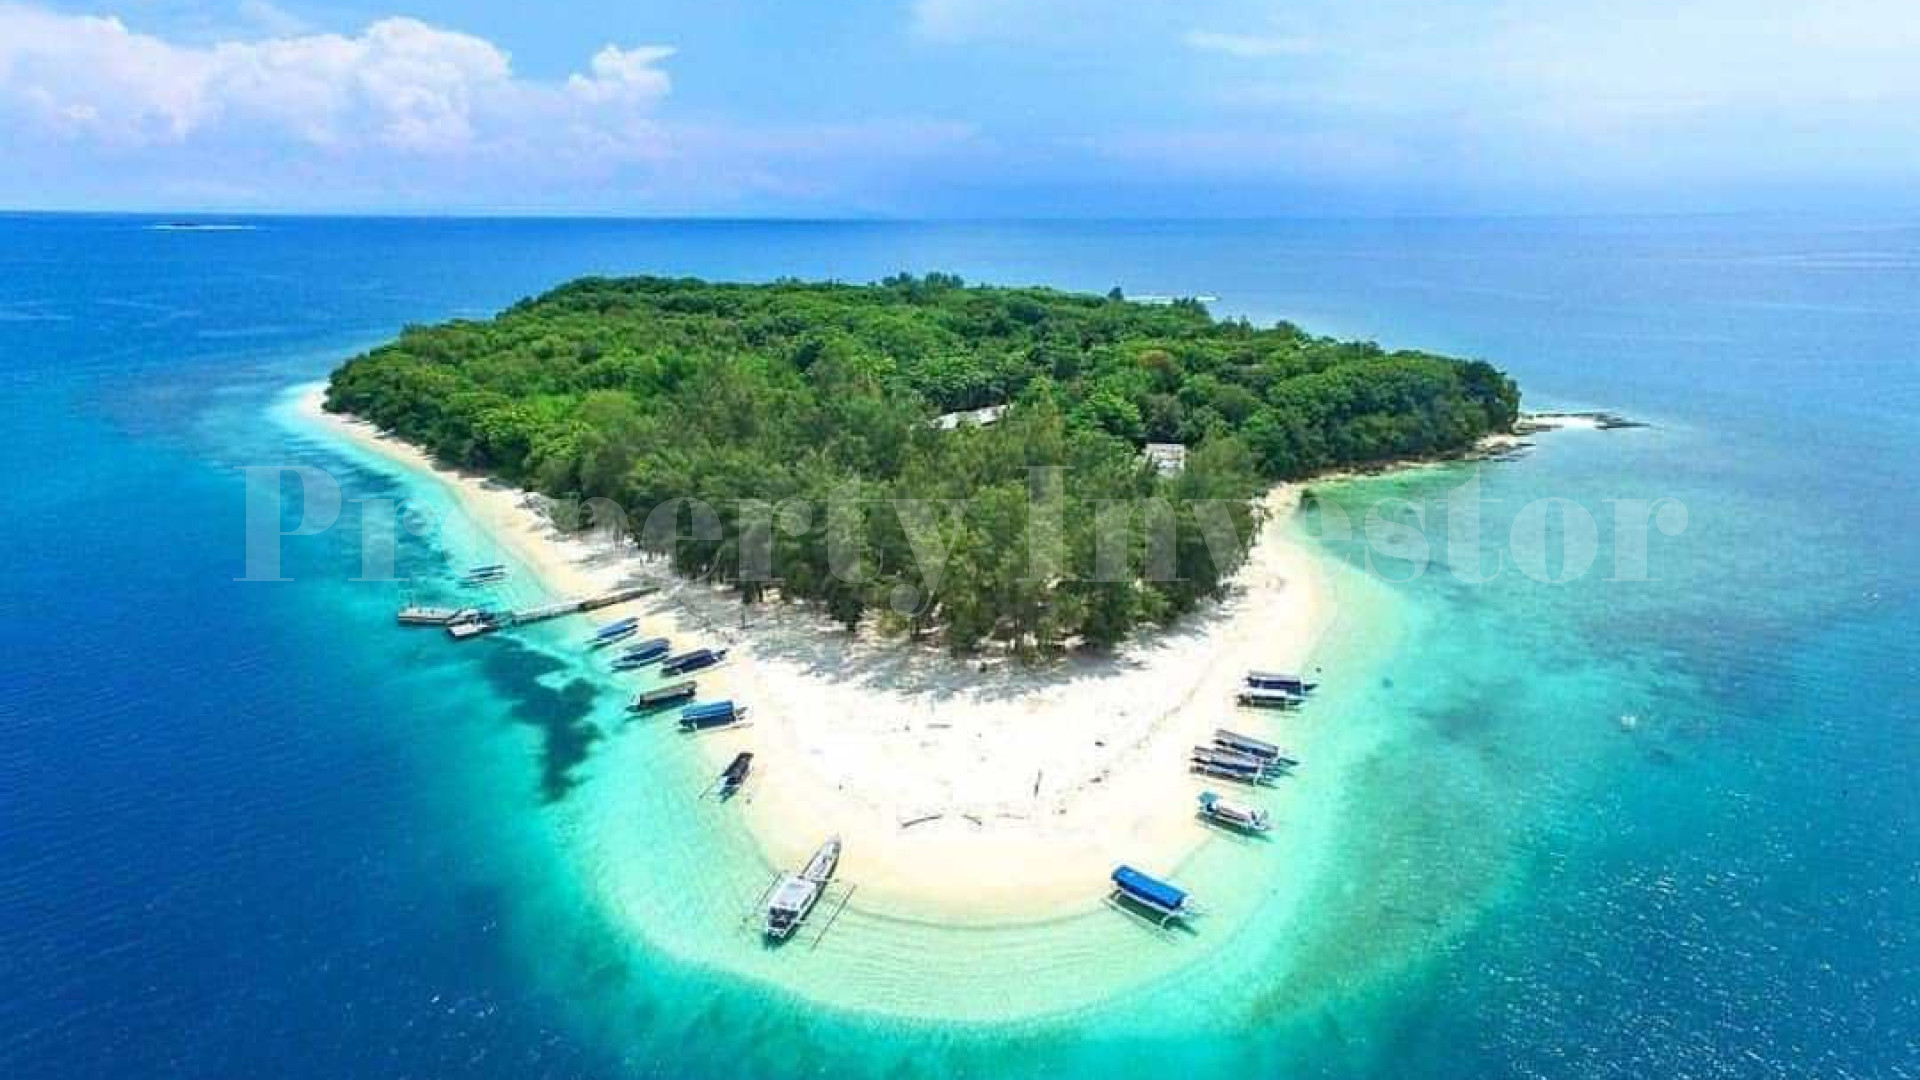 12.5 Hectare Private Island for Commercial Development Near Lombok, Indonesia